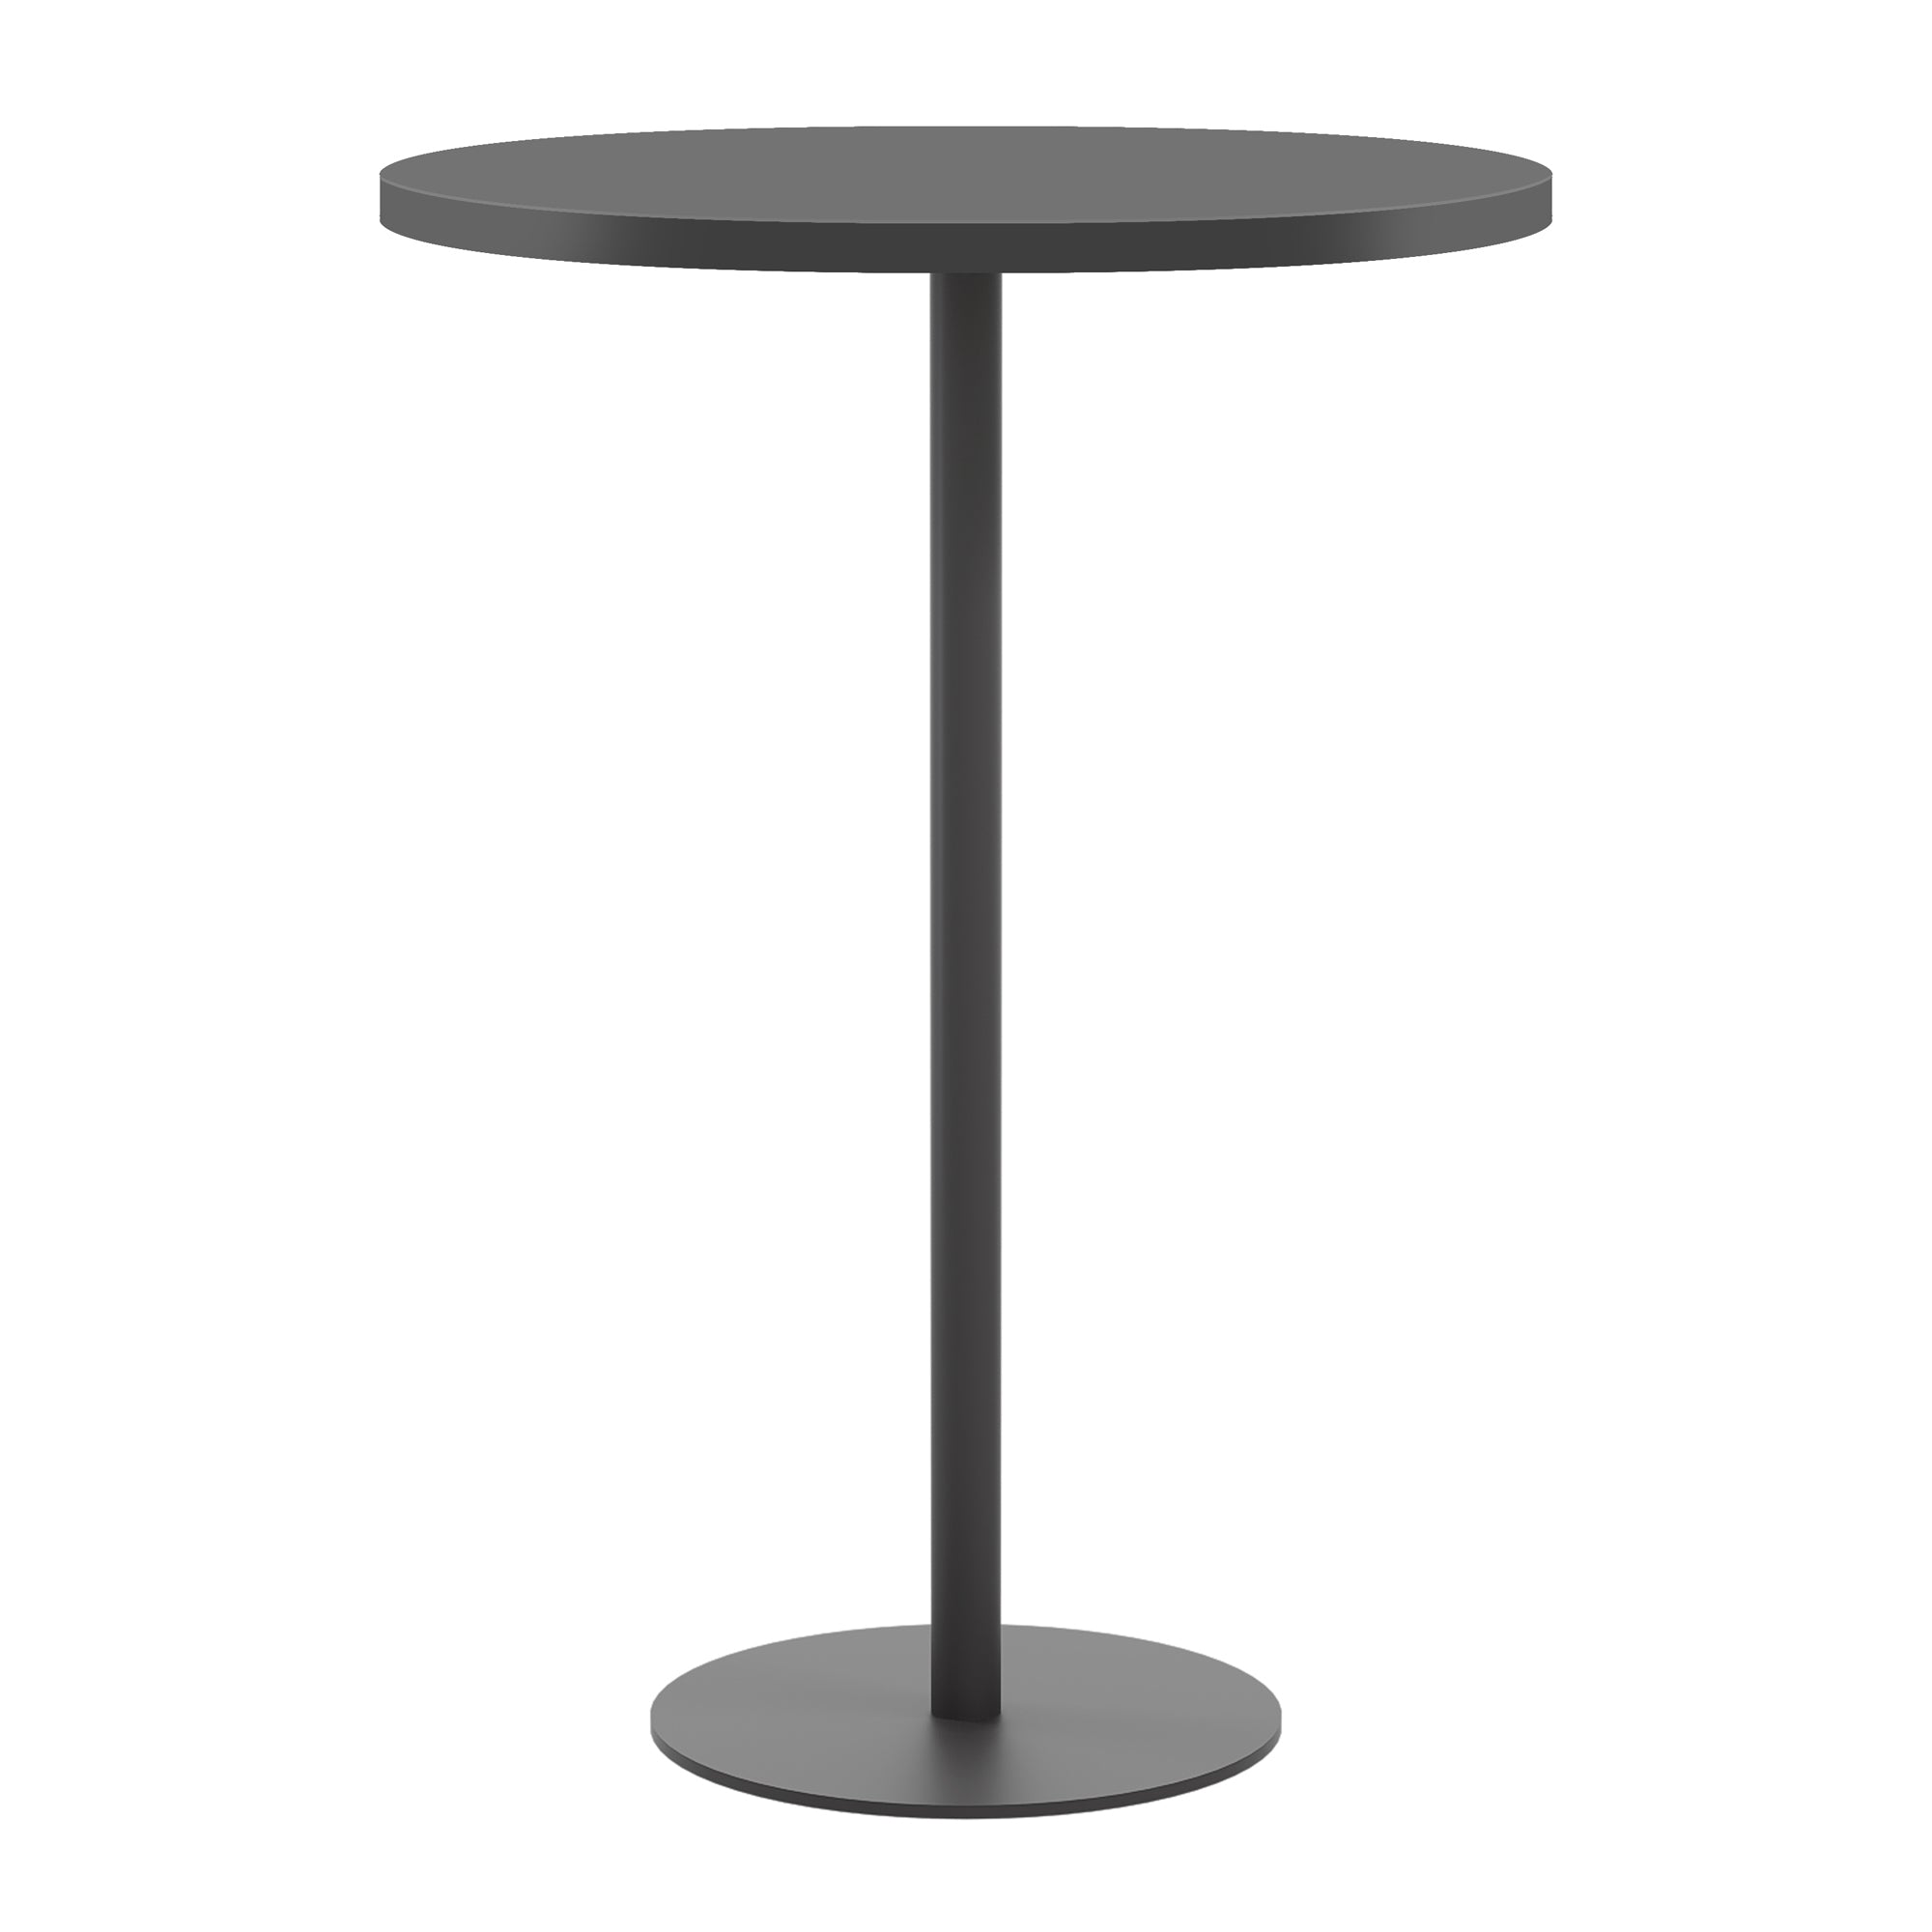 Contract 800mm High Table